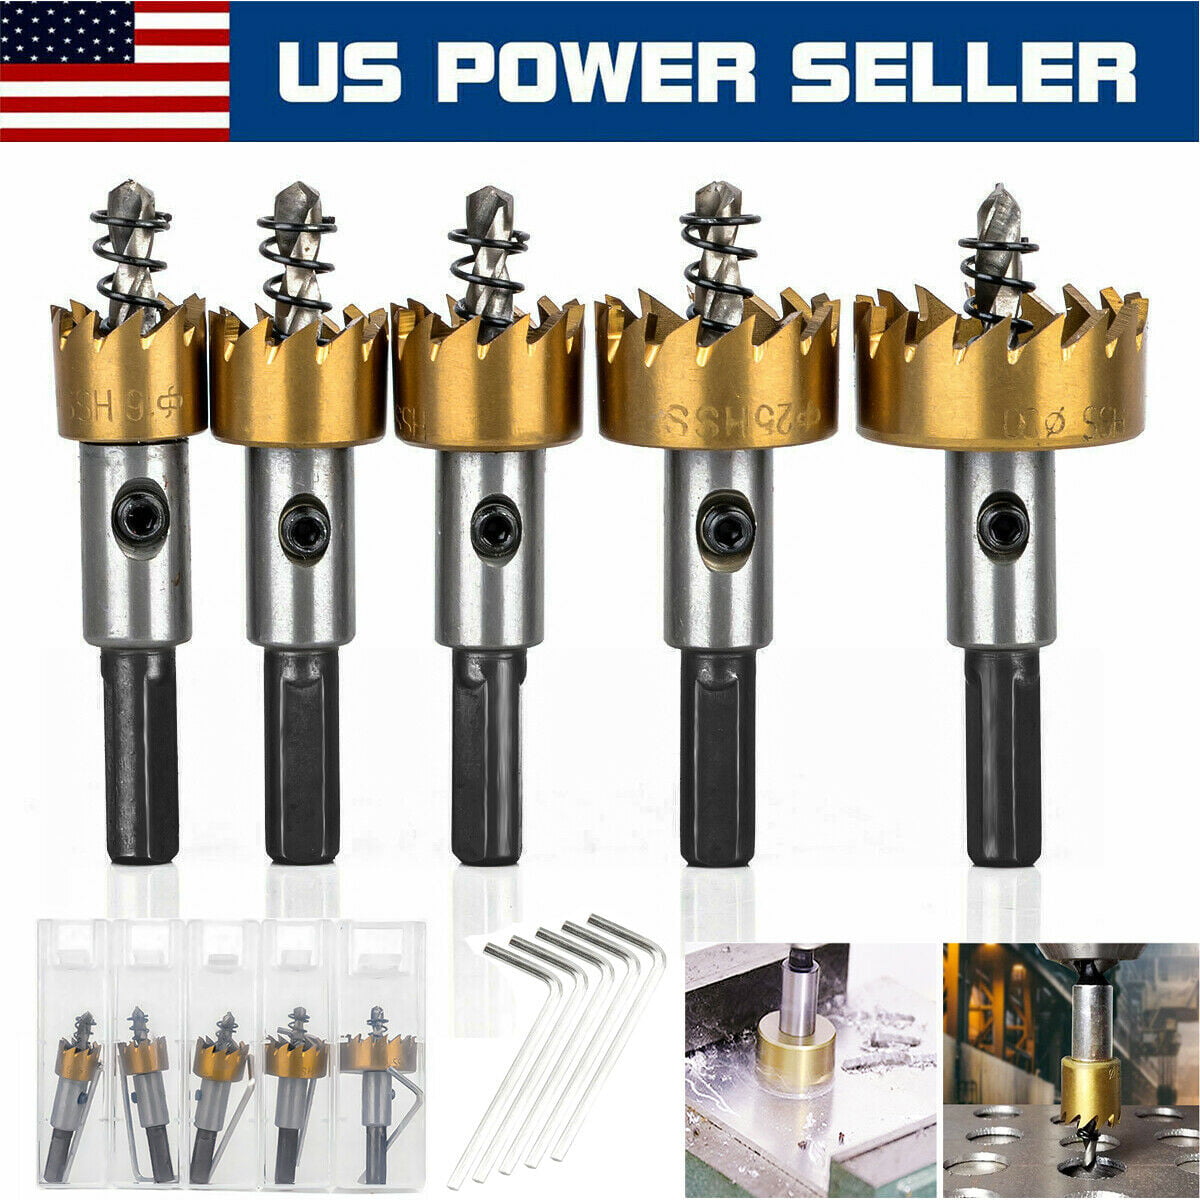 5PCS Hole Saw Tooth Kit HSS Steel Drill Bit Set Cutter Tool For Metal Wood Alloy 